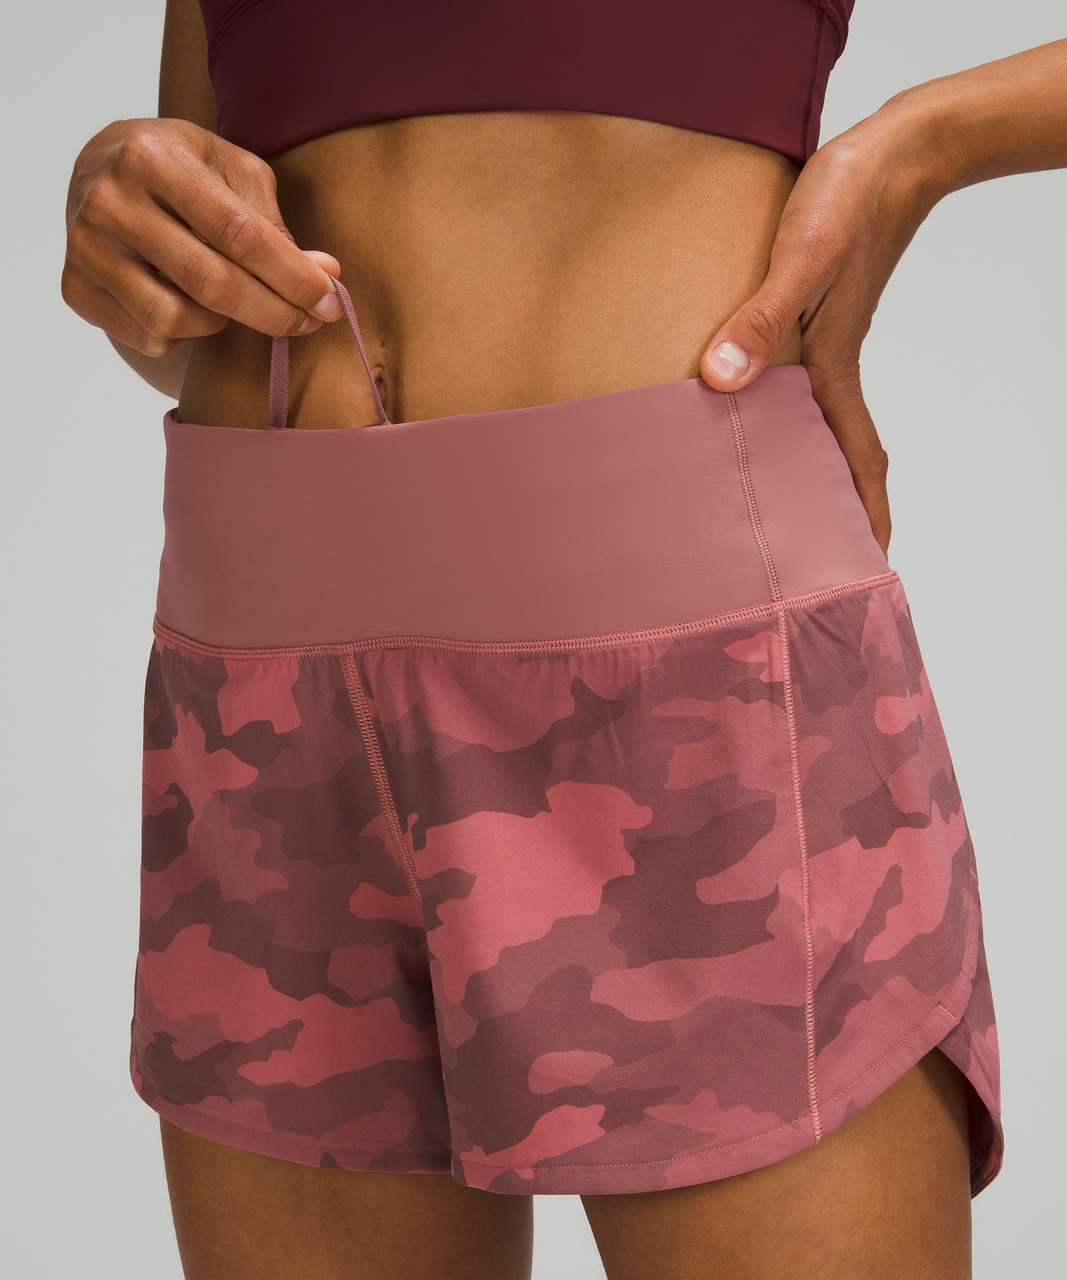 Lululemon Speed Up Mid-Rise Short 4" - Heritage 365 Camo Brier Rose Multi / Spiced Chai